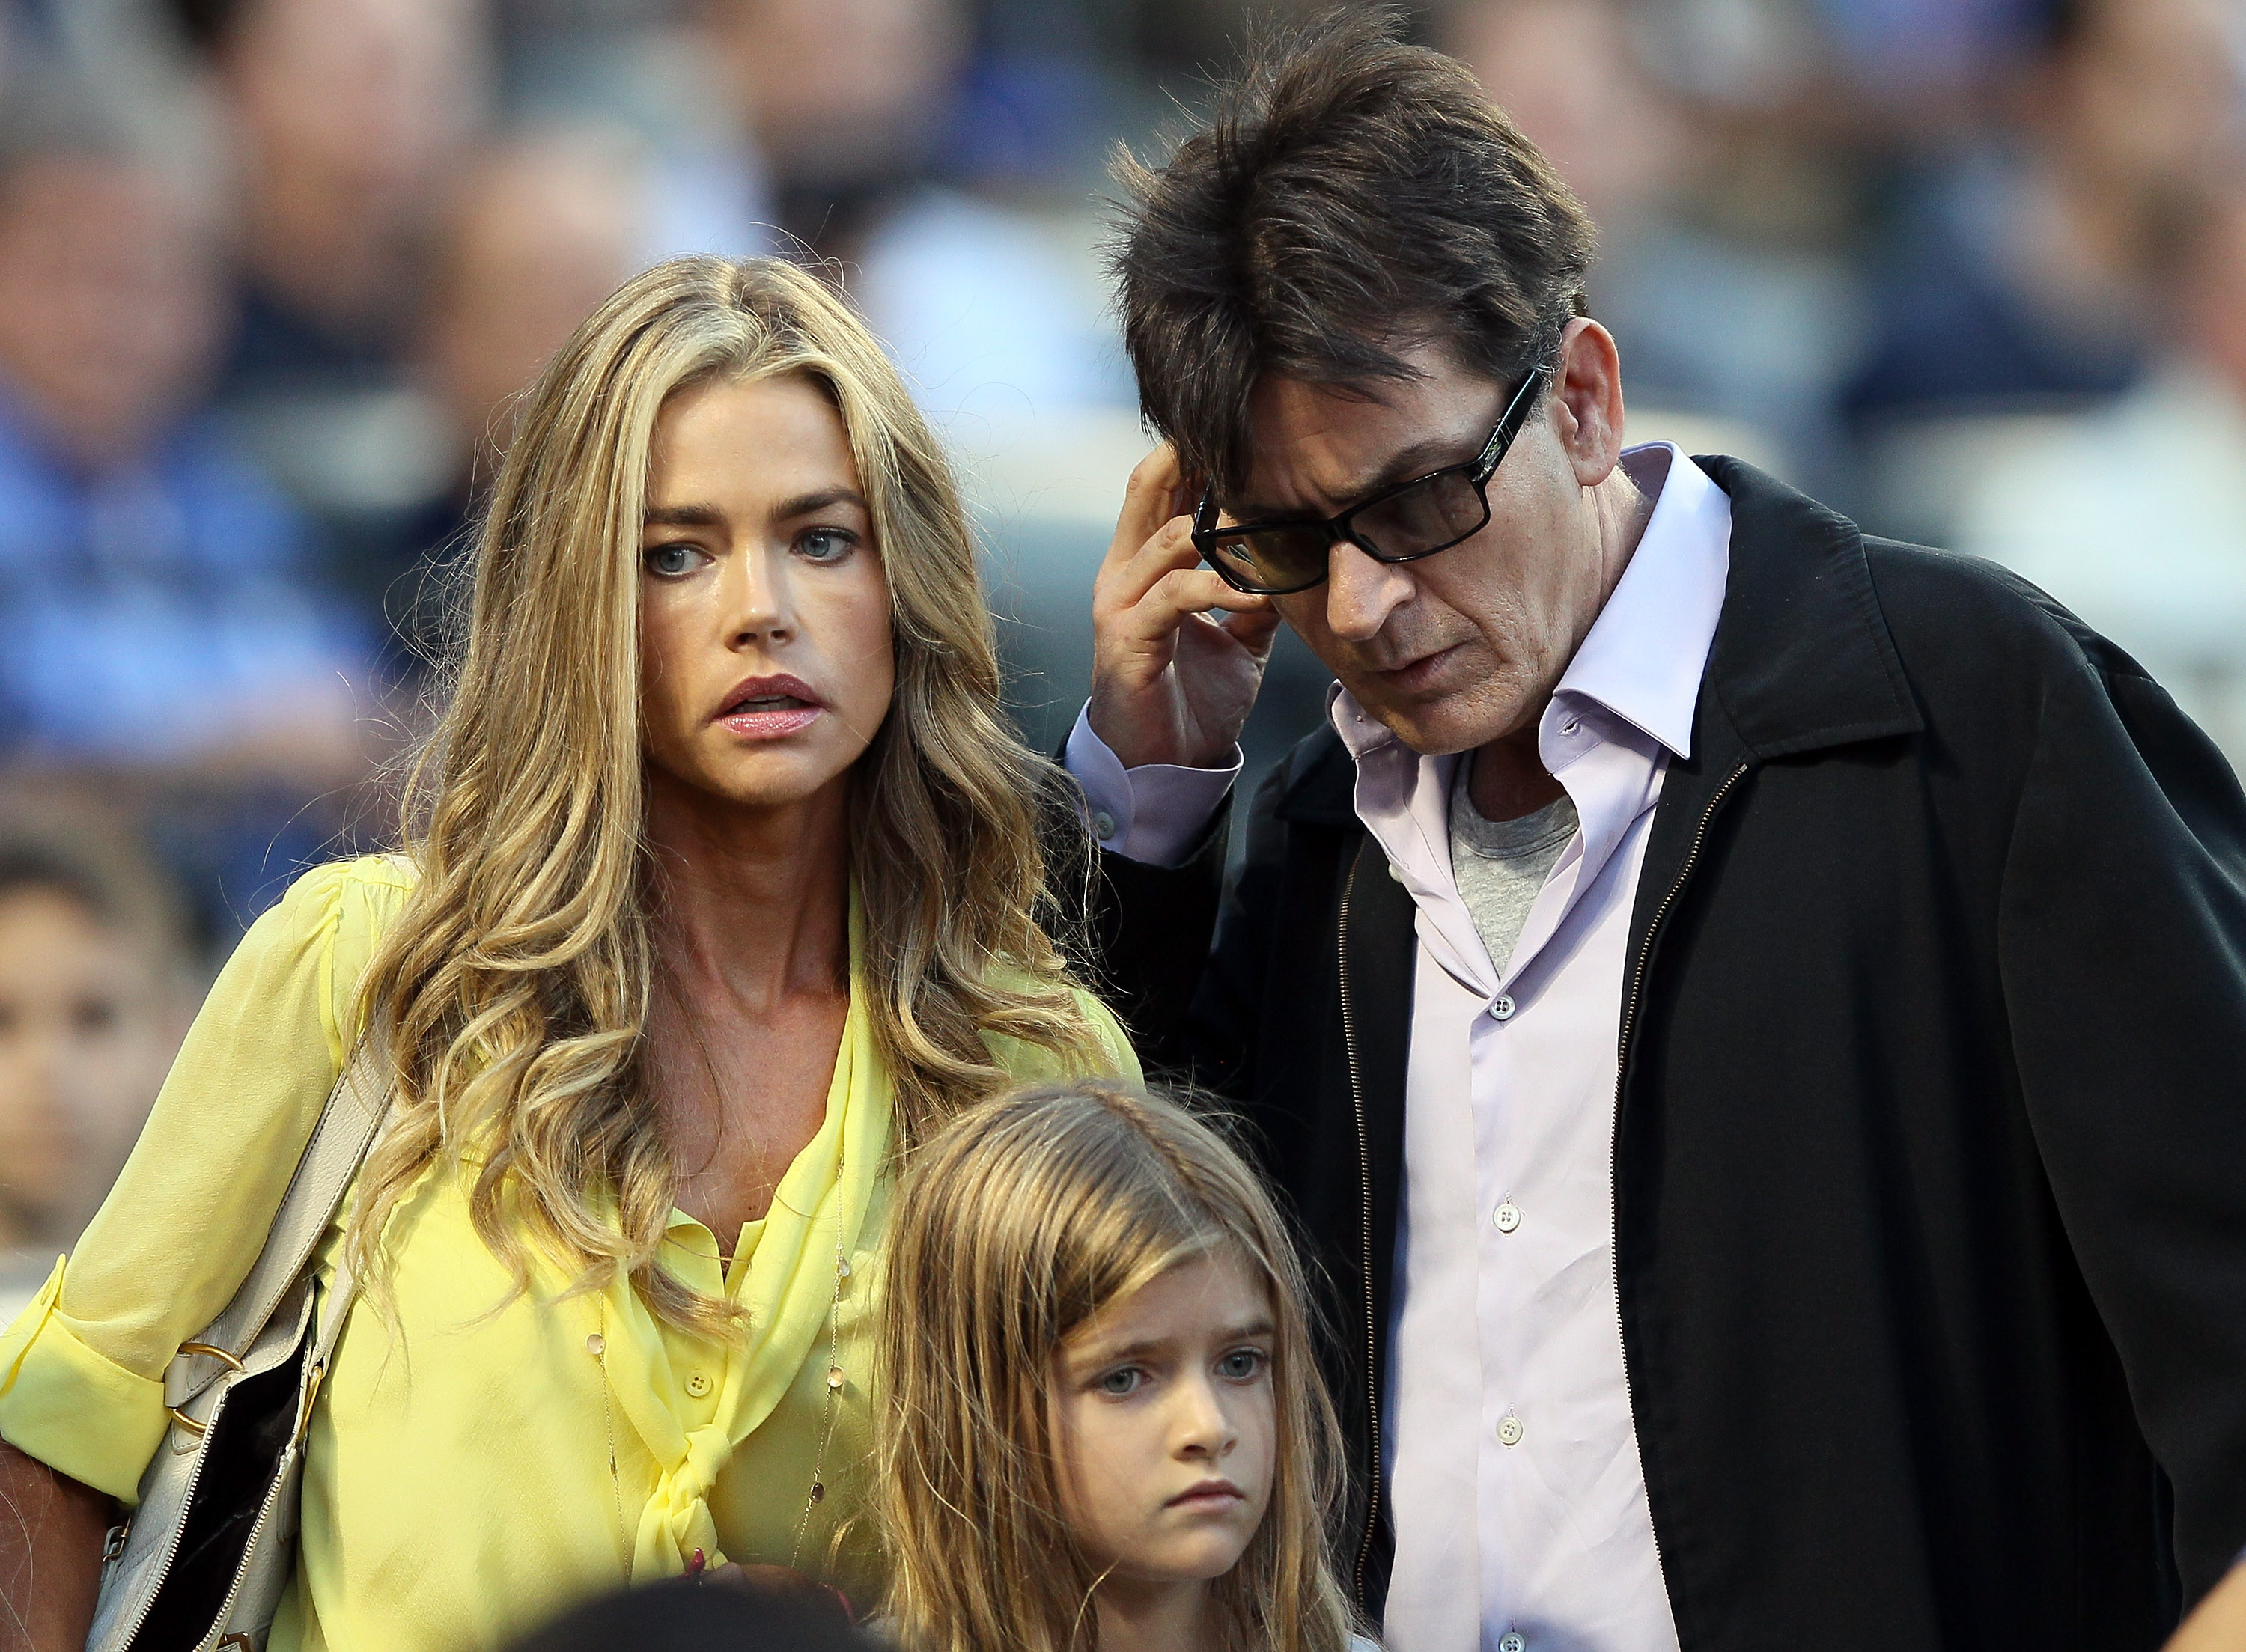 Denise Richards, Charlie Sheen, and Sam Sheen in New York City on June 23, 2012 | Source: Getty Images